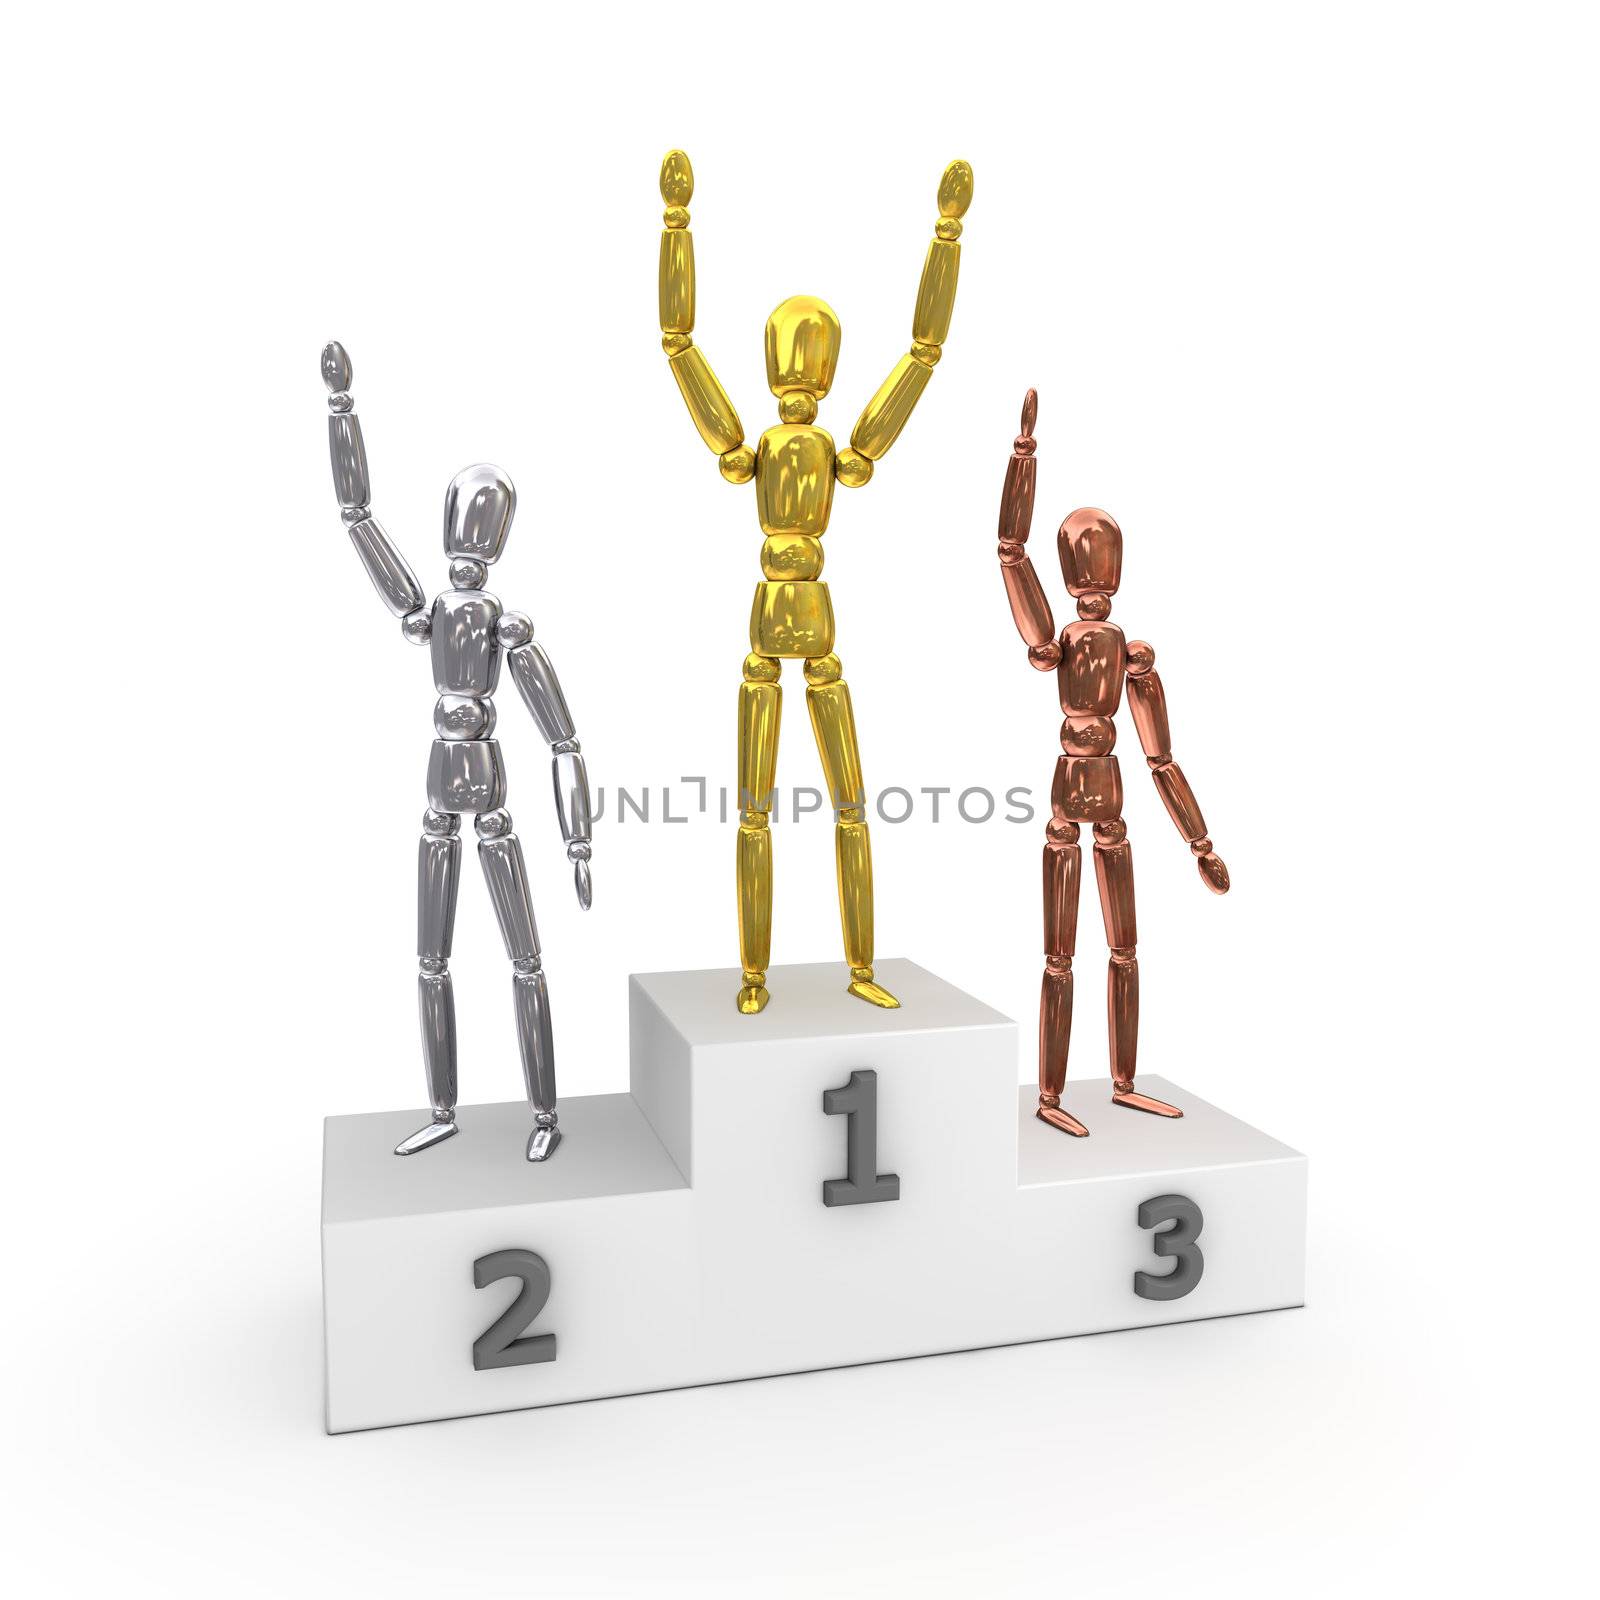 Victory Podium - Winners in Gold, Silver, Bronze by PixBox